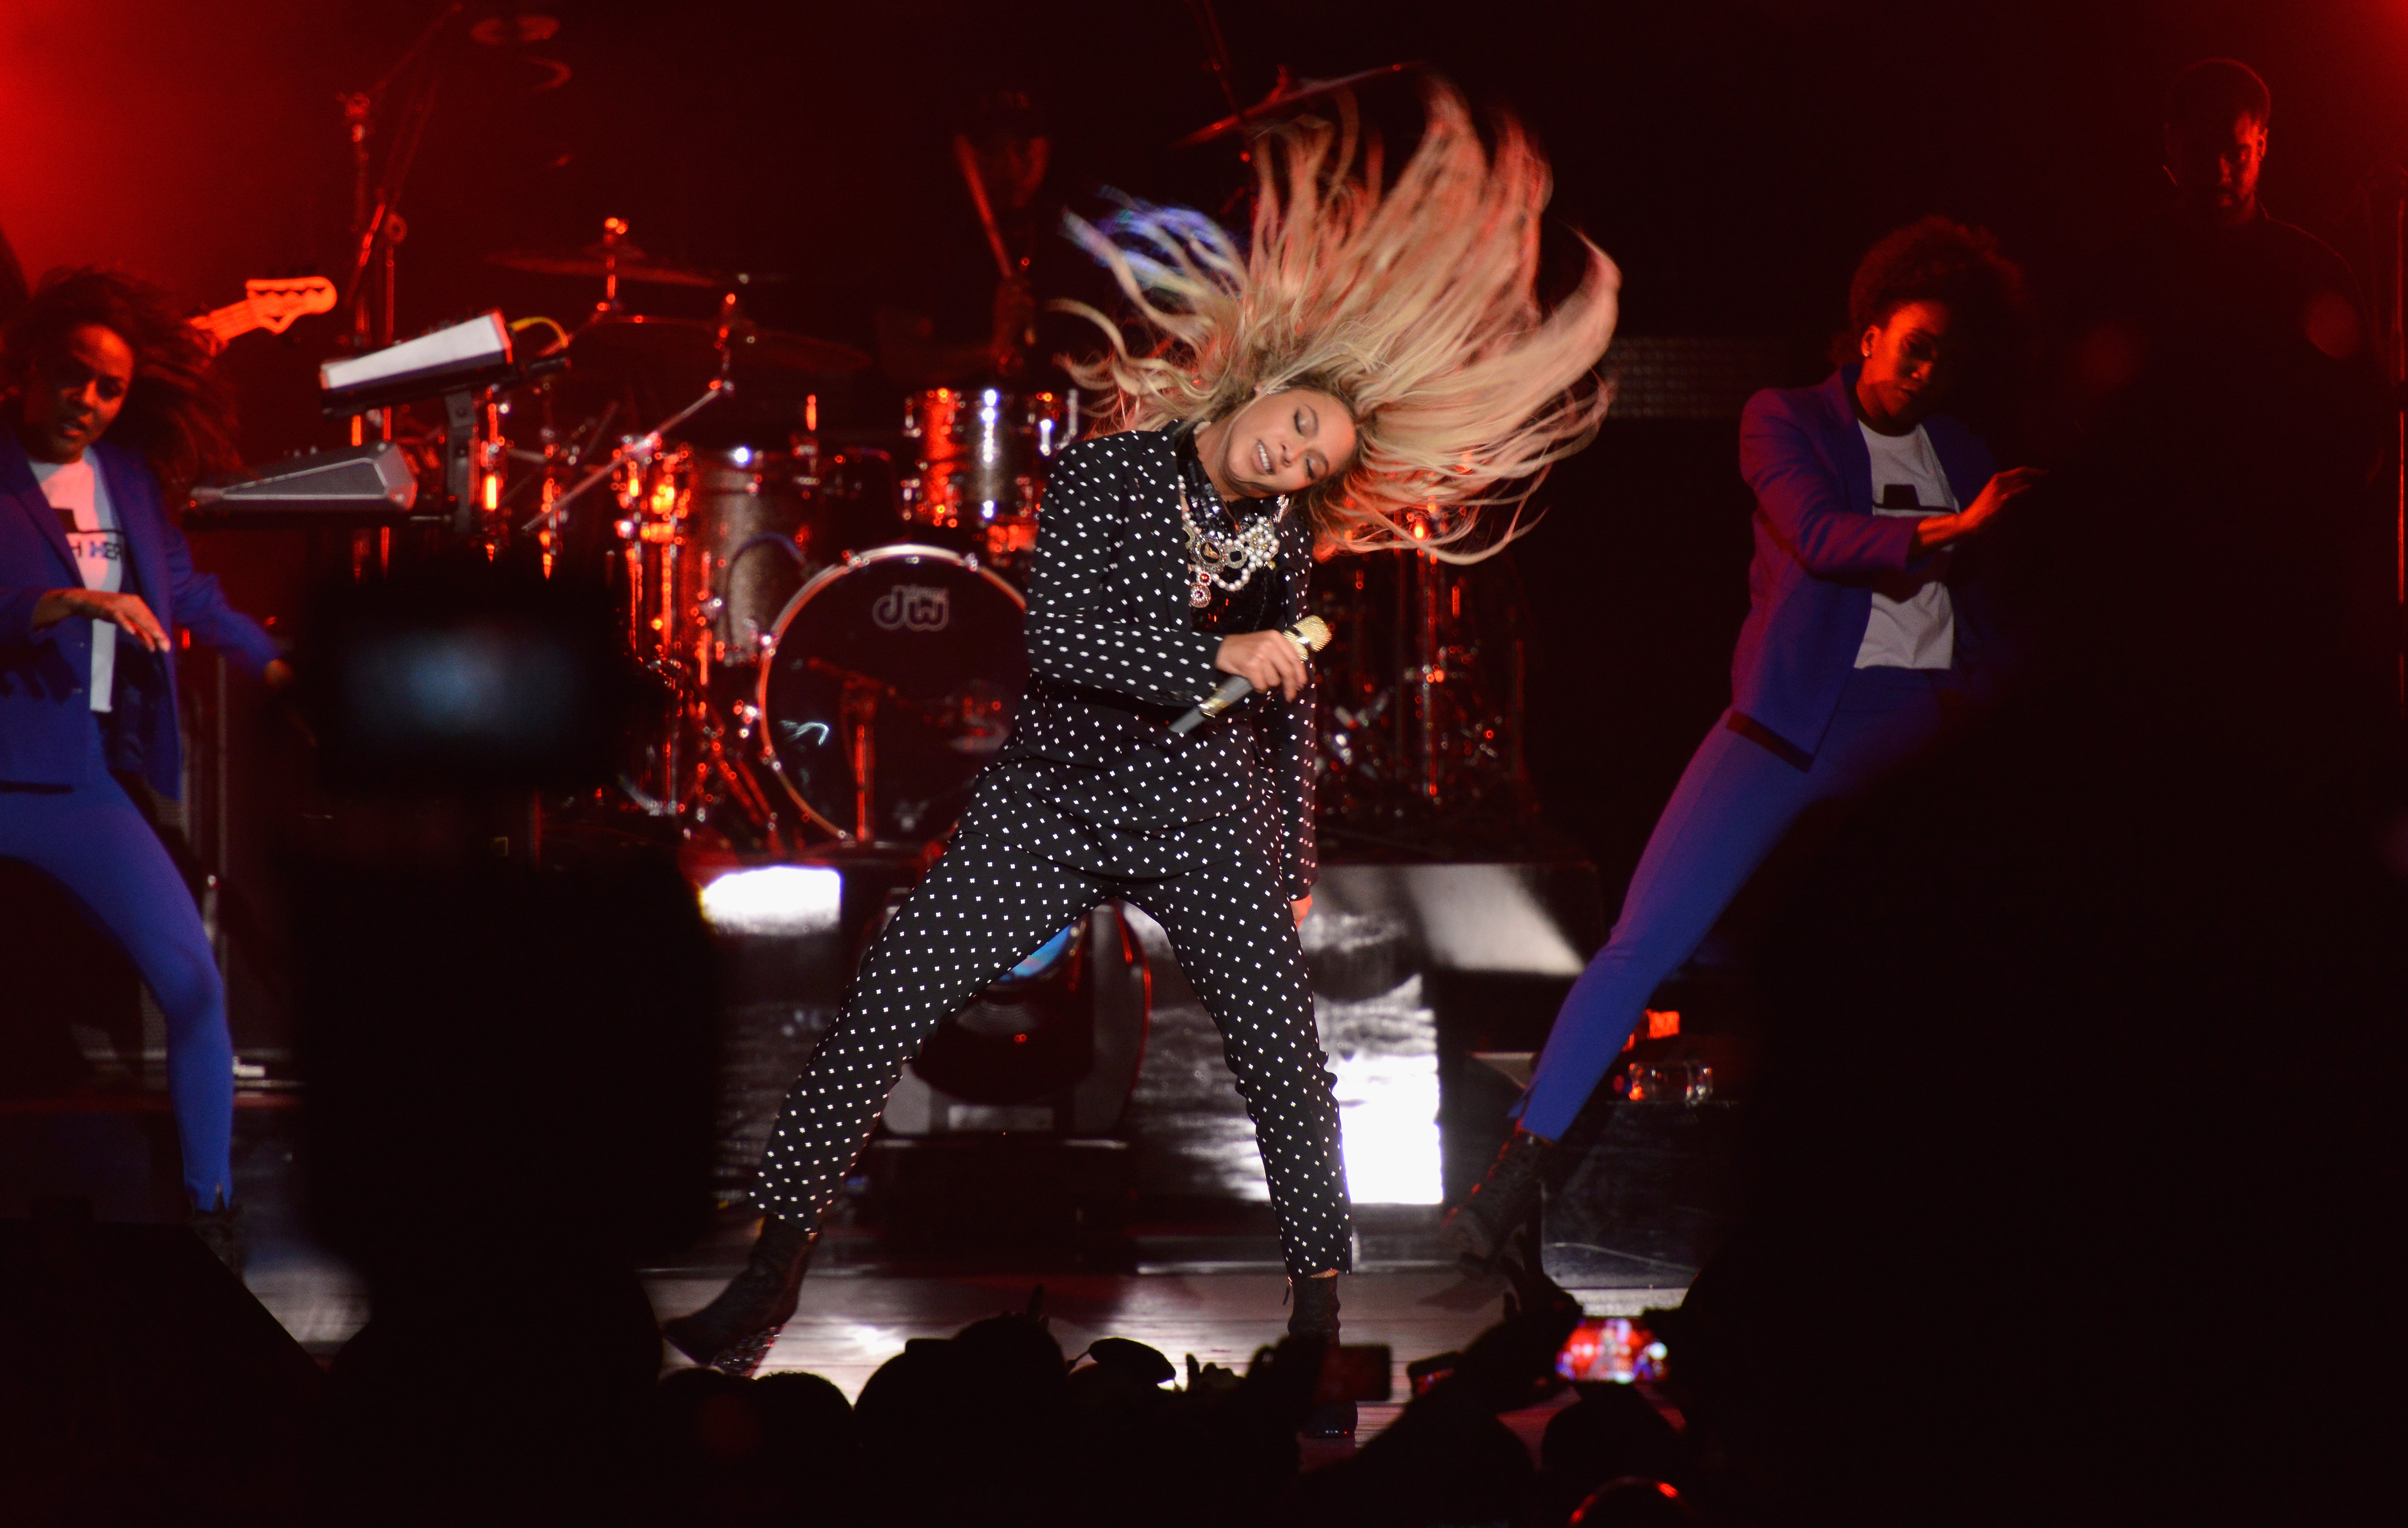 25 Times Beyoncé’s Hair Defied Gravity On Stage